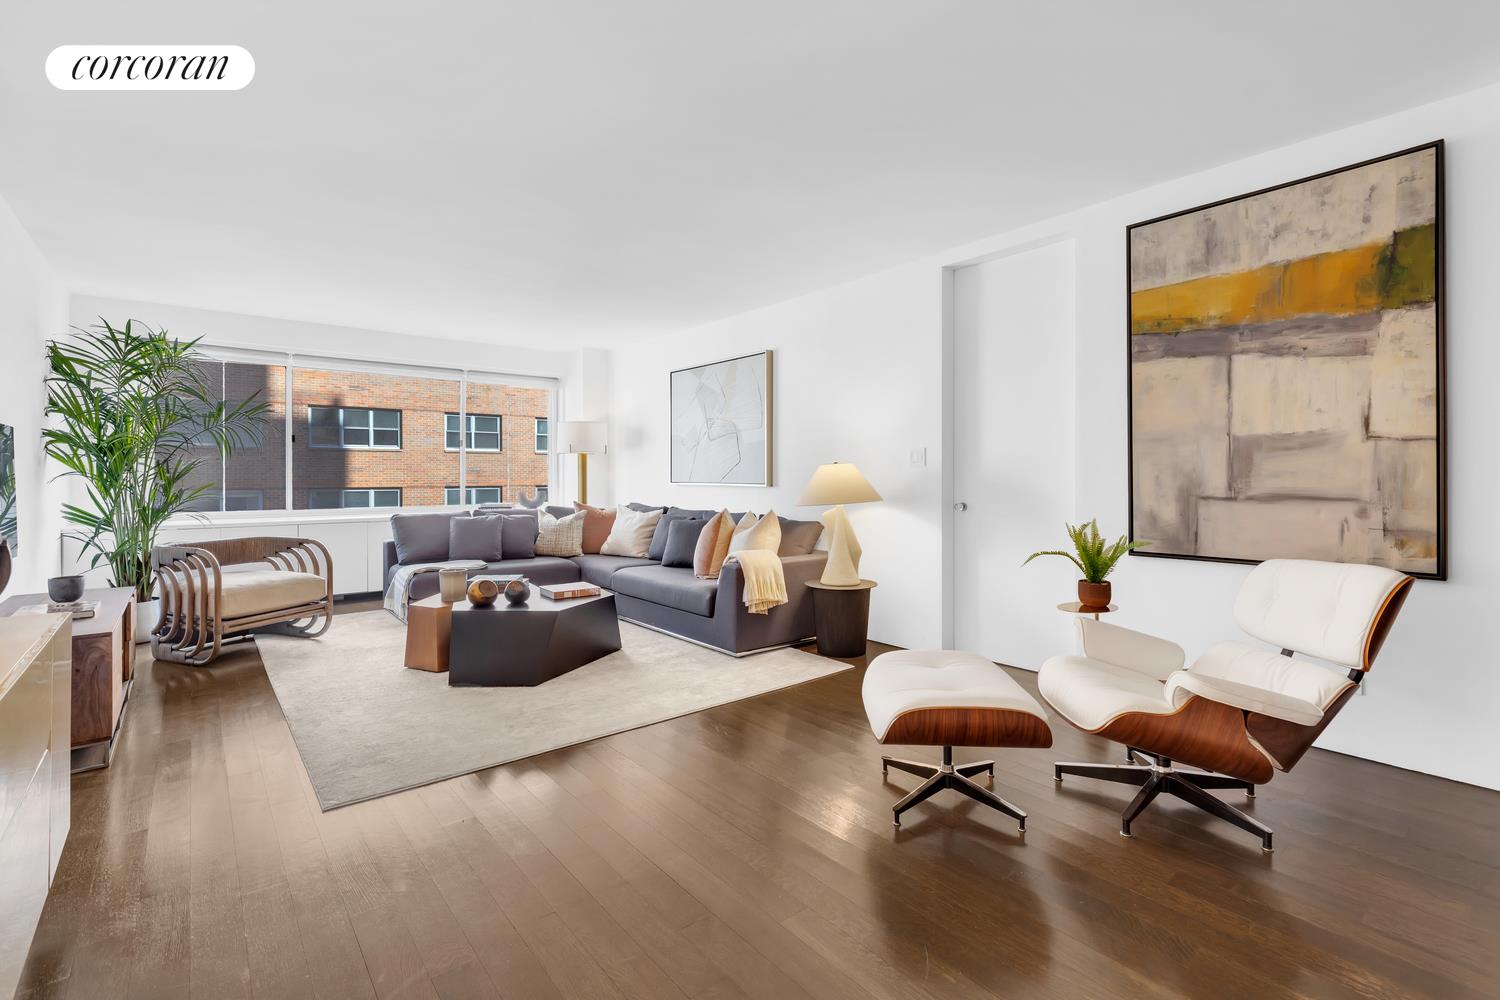 30 East 65th Street 8Ab, Lenox Hill, Upper East Side, NYC - 3 Bedrooms  
3.5 Bathrooms  
7 Rooms - 